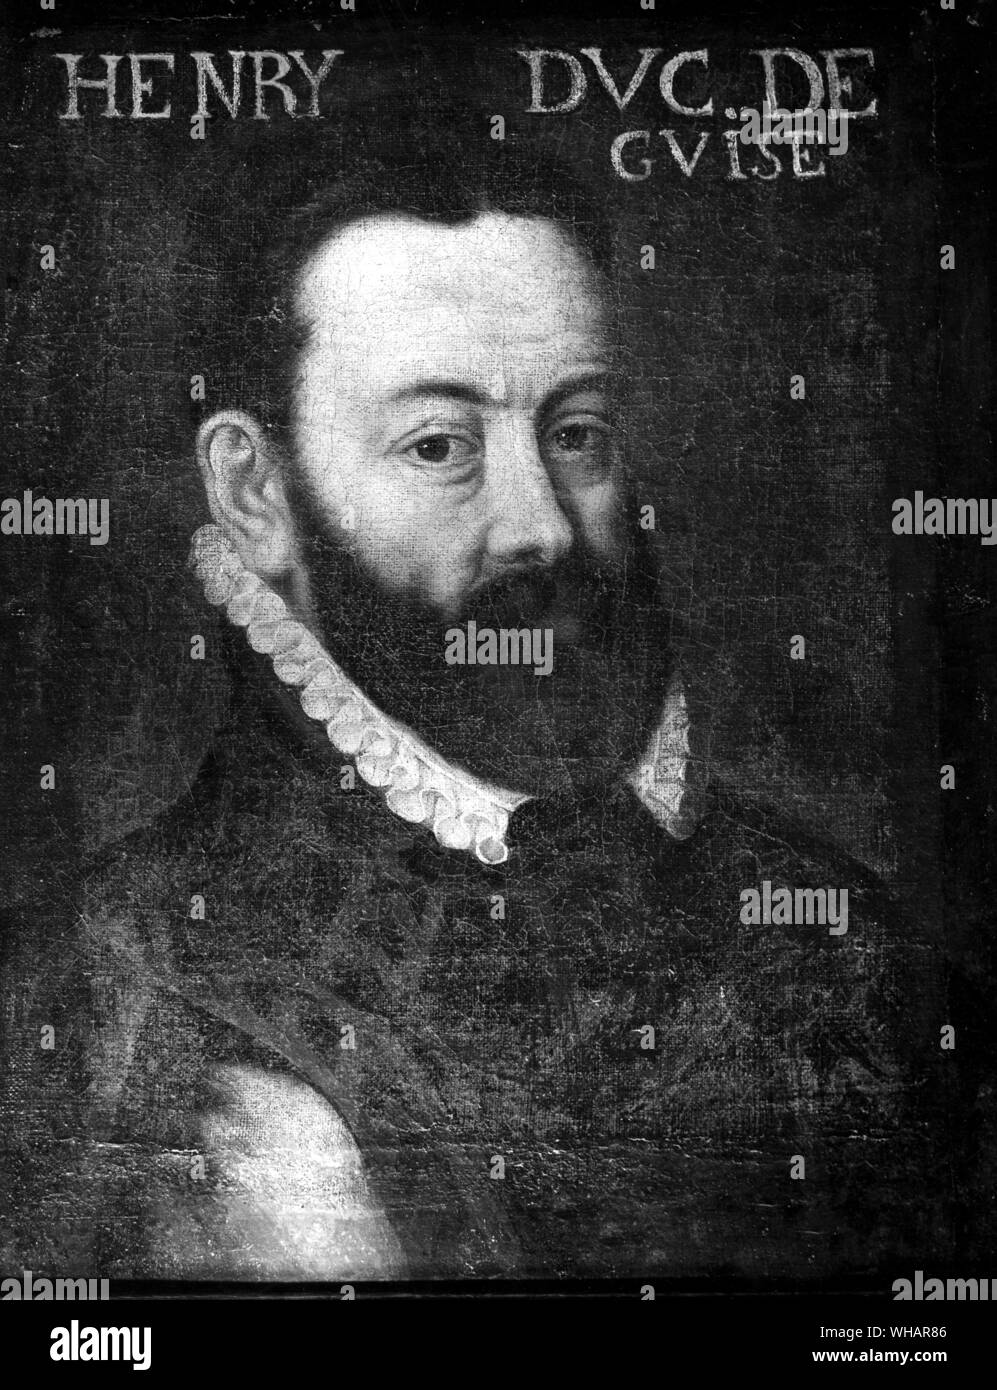 Henry Duke of Guise whose assassination was instigated by Henry III of France. 16th century Stock Photo